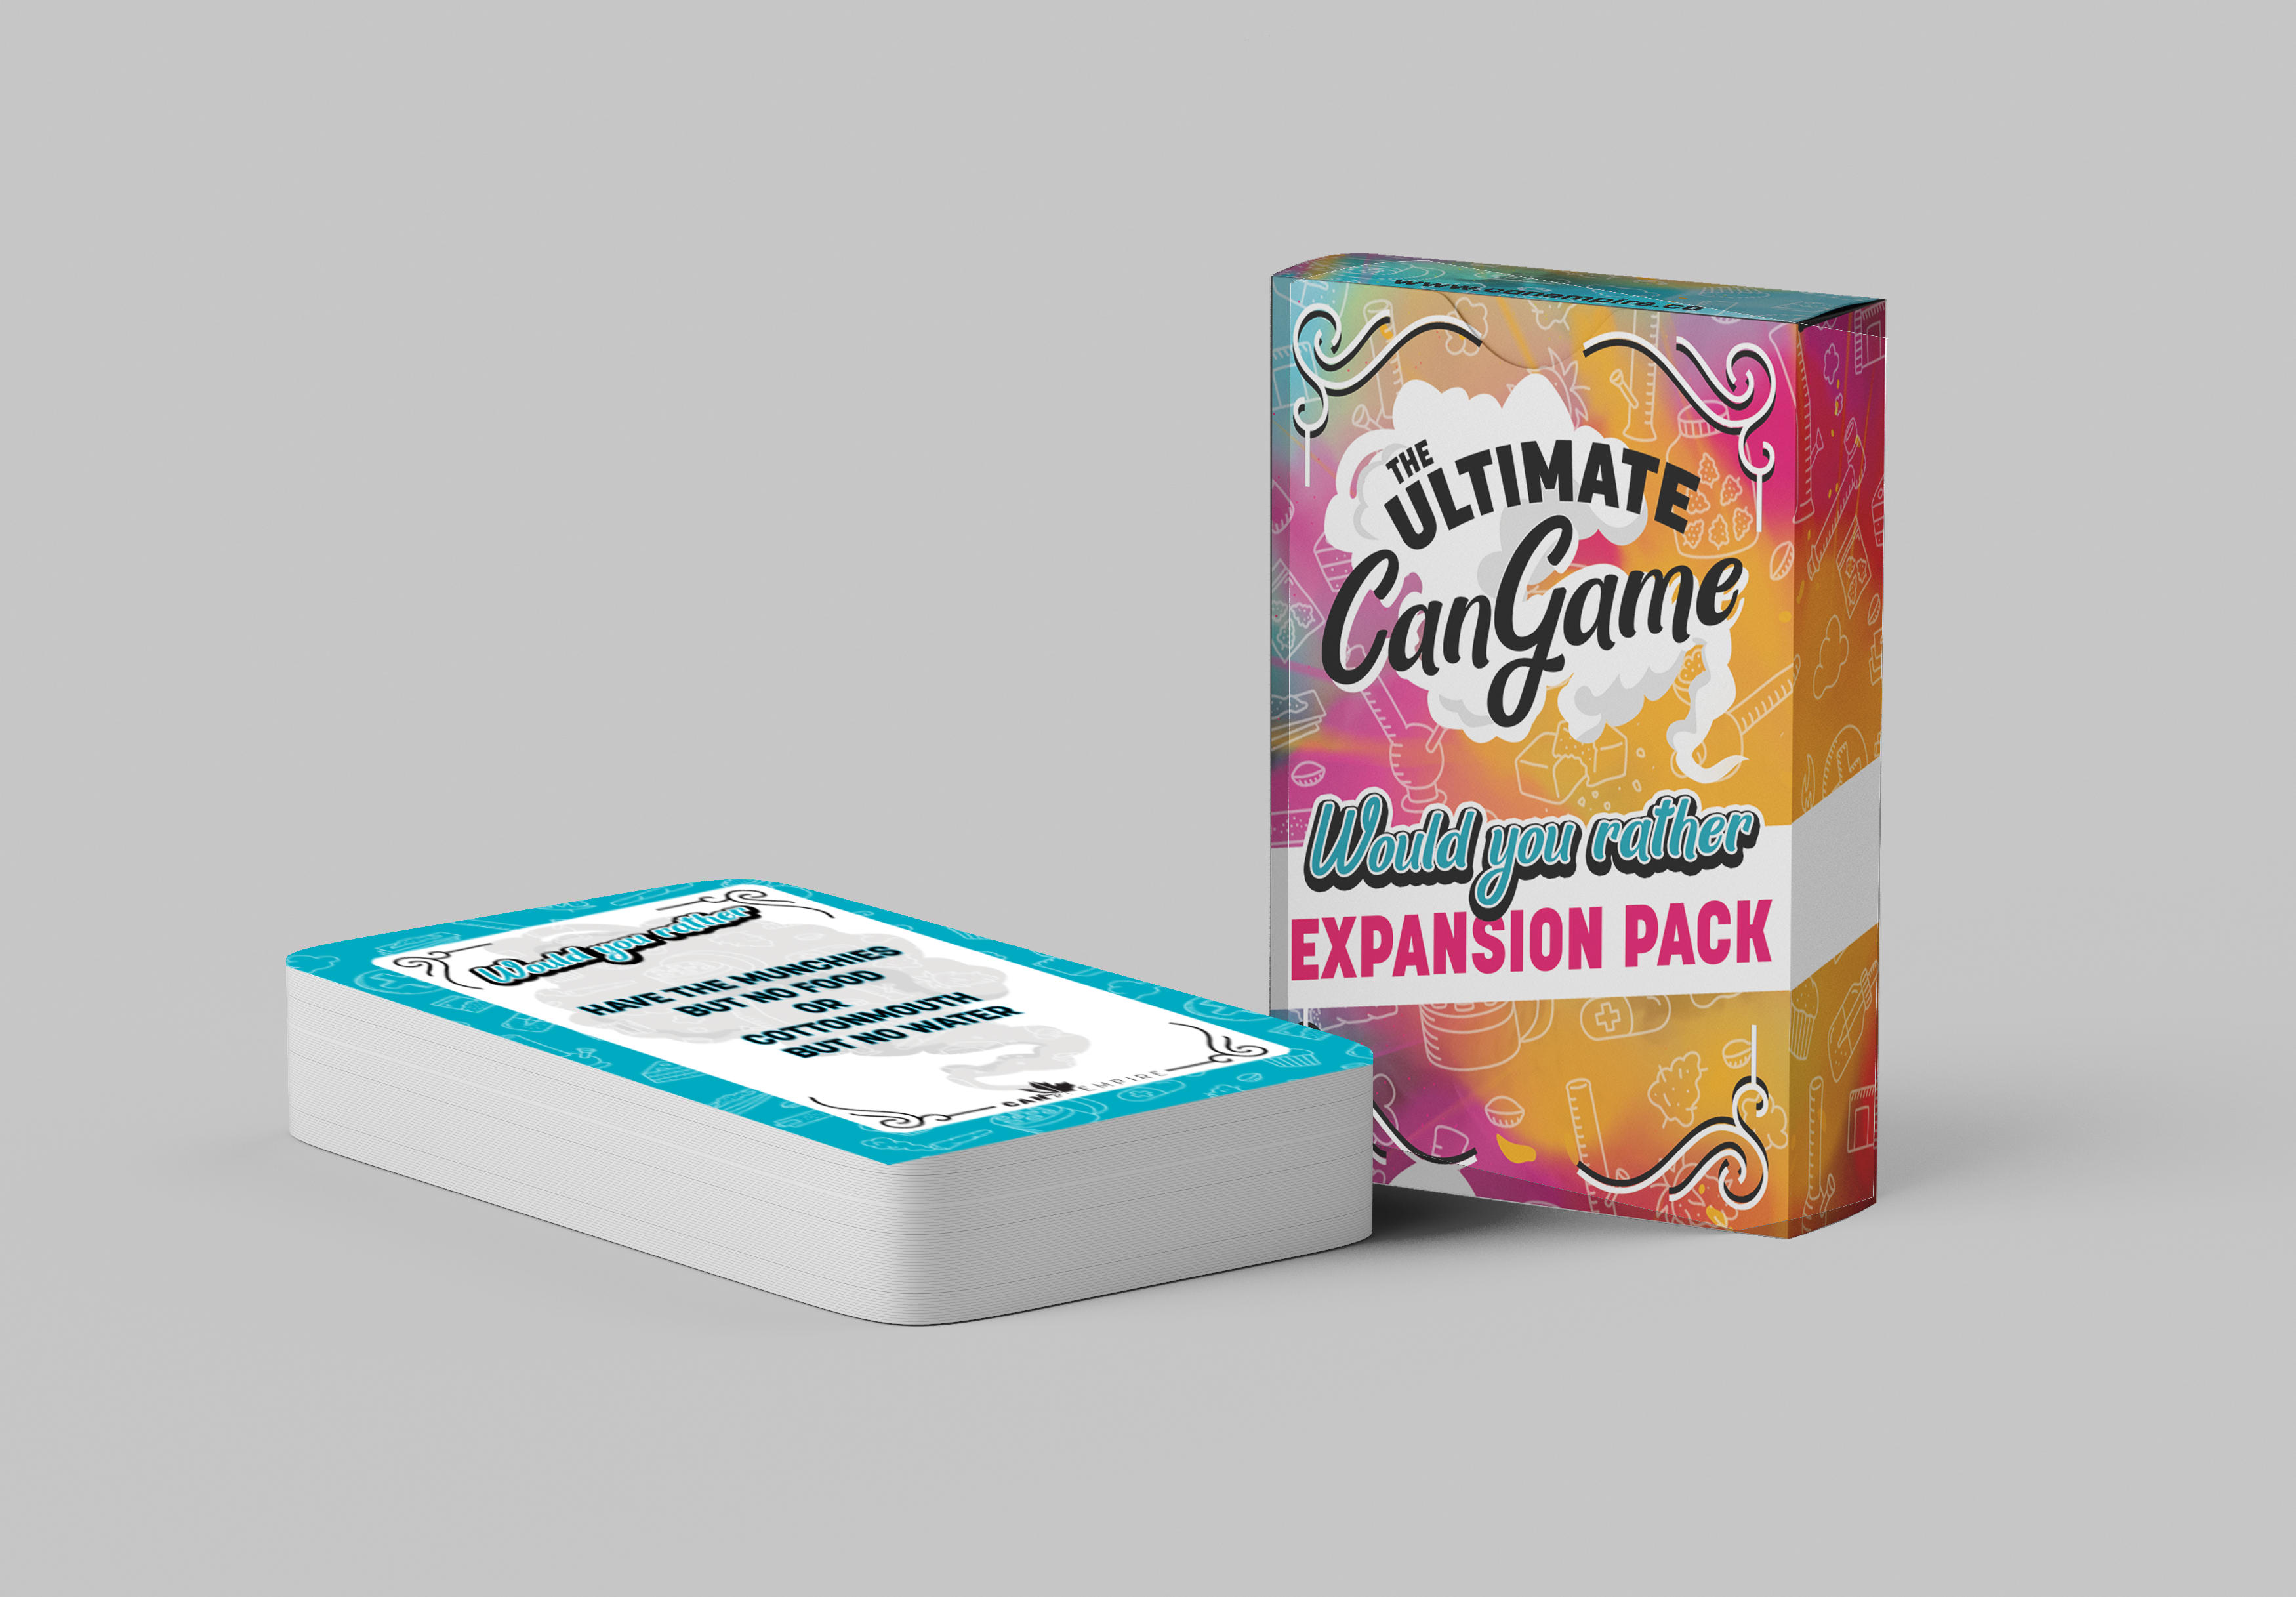 Would You Rather, expansion pack, The Ultimate CanGame, 420 party card game by canempire, www.canempire.ca